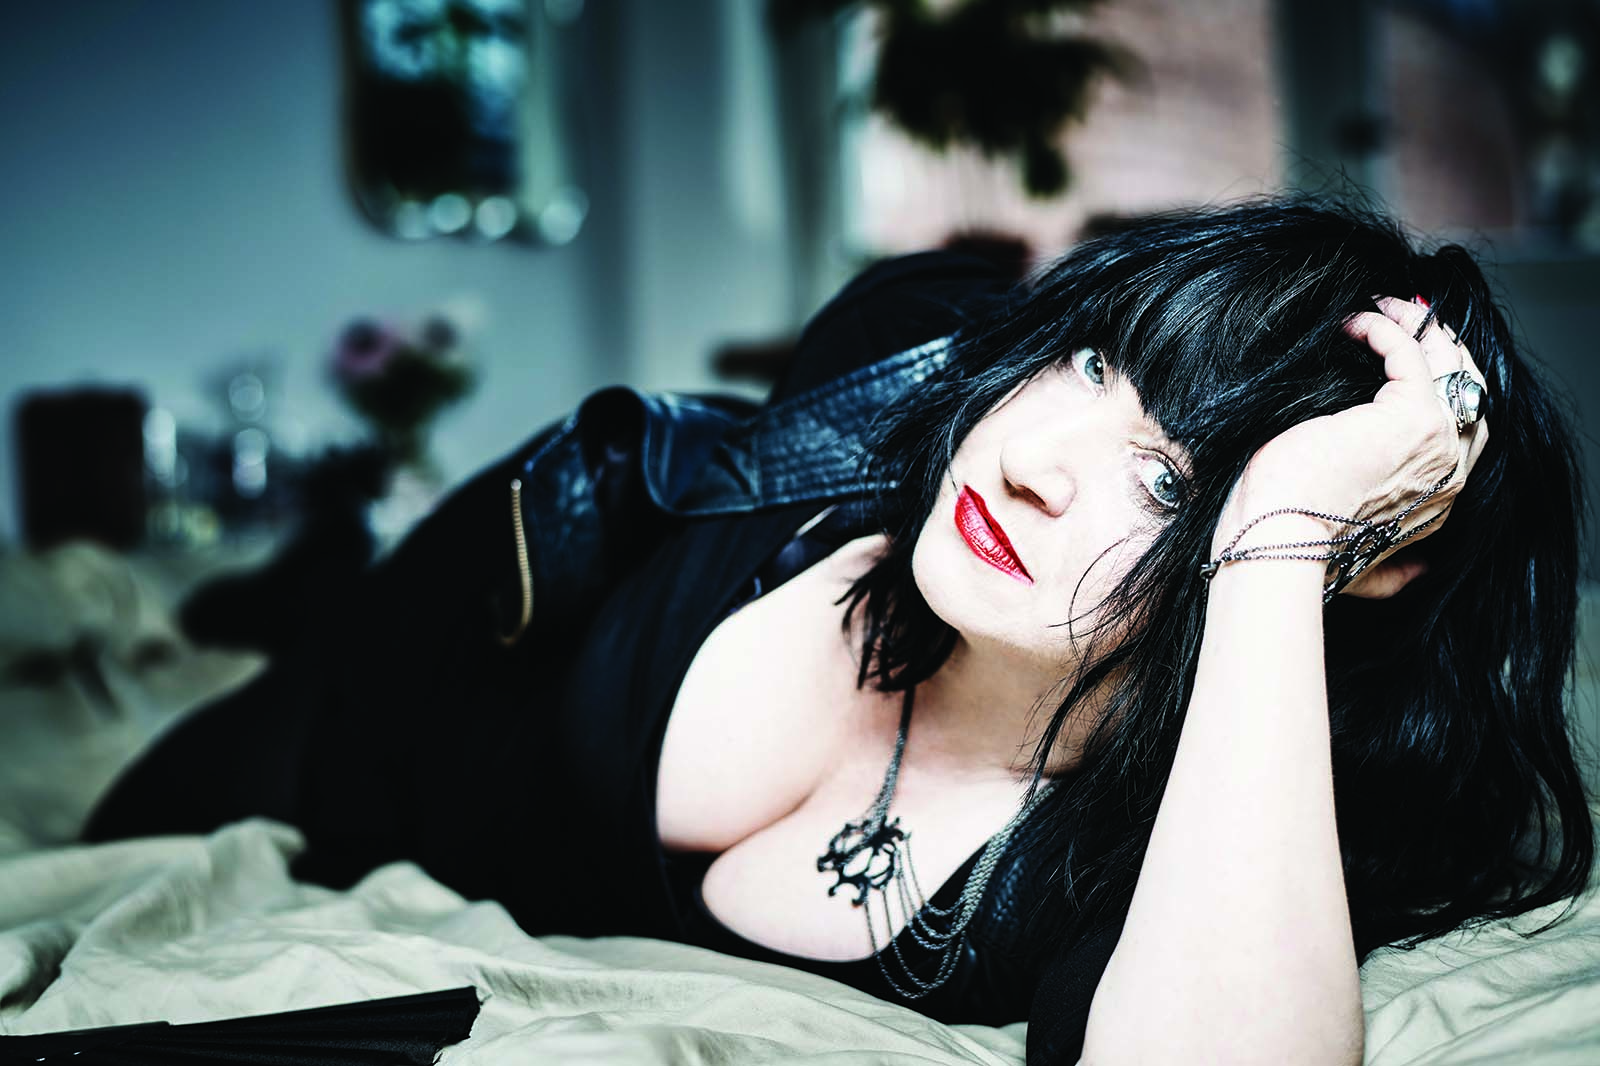 <b><i>Lydia Lunch: The War is never over</i></b>